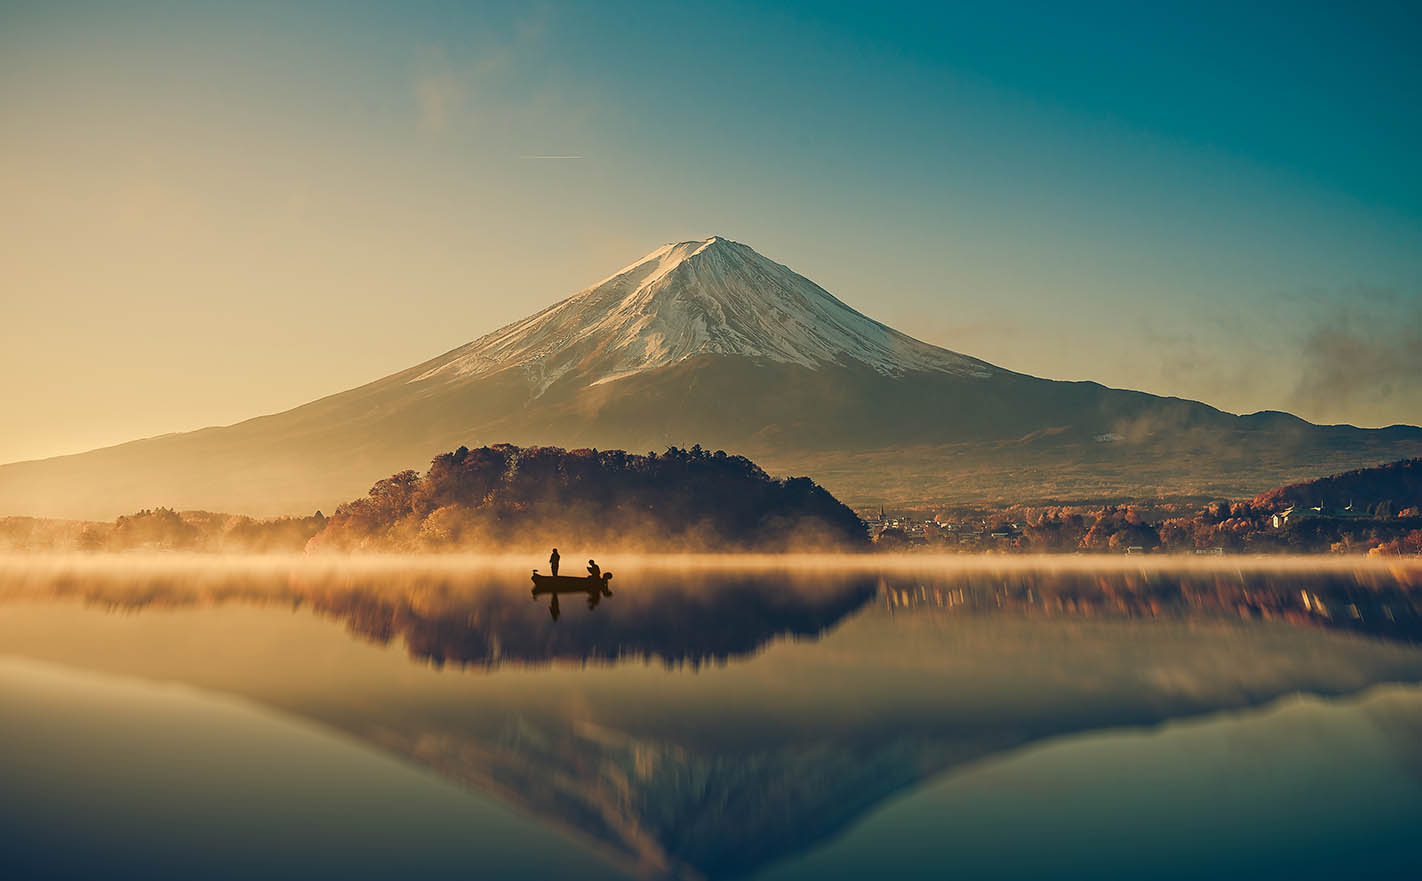 Mountains and lake in Japan